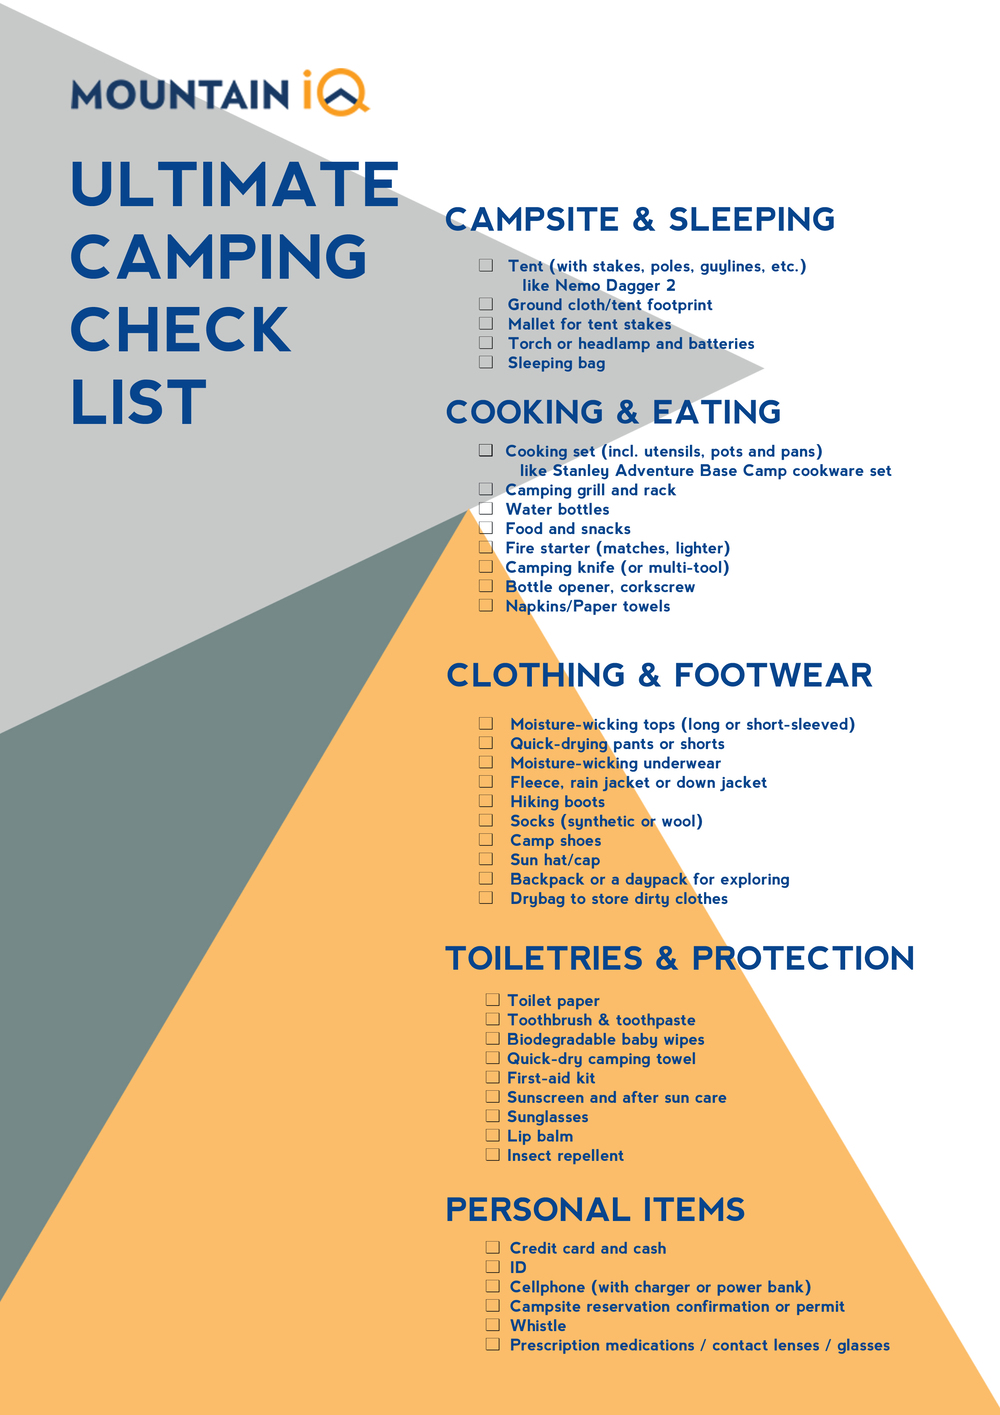 Camping Checklist – What To Bring Camping (Free PDF) - Mountain IQ